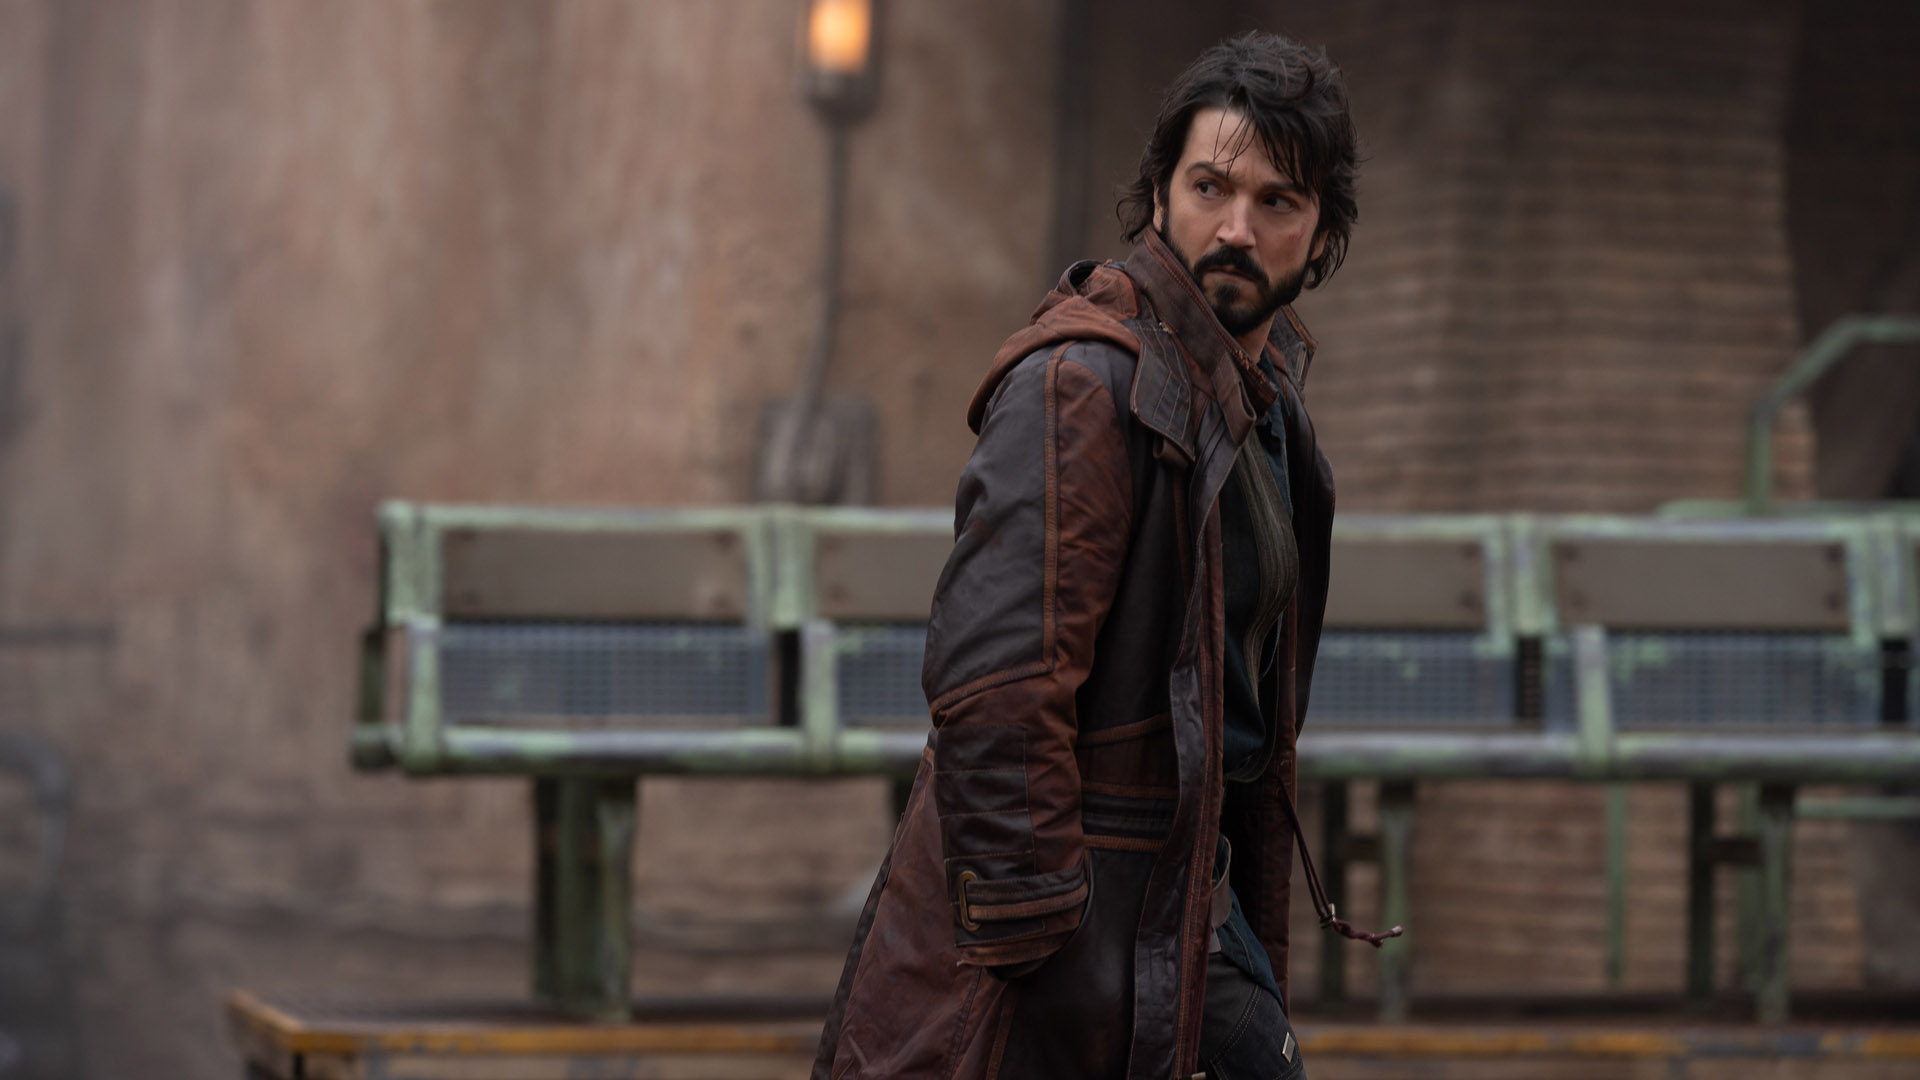 Cassian Andor looks back as he walks through the main town of Ferrix in Andor on Disney Plus